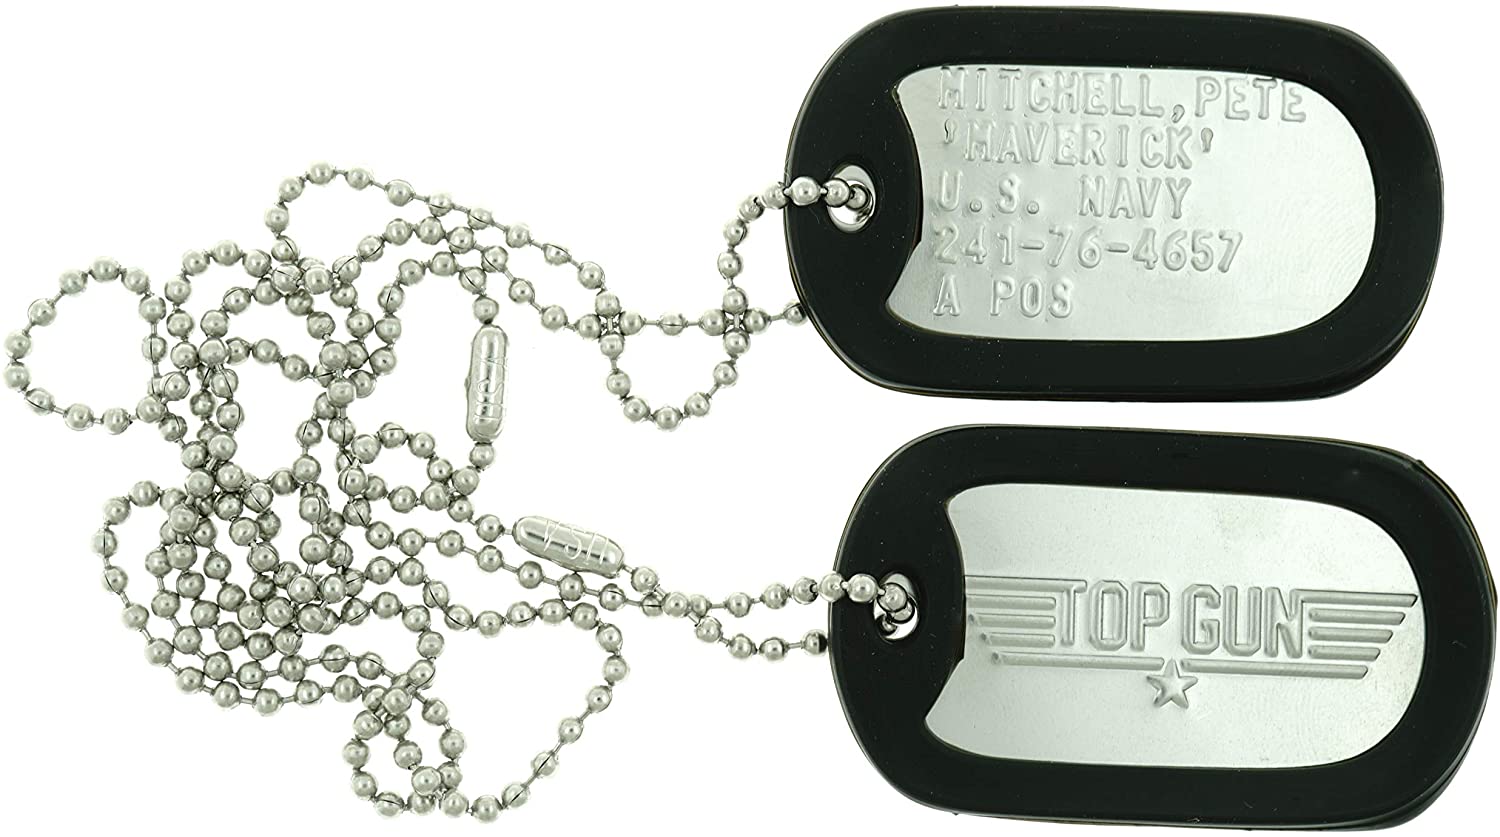  Top Gun Pete Mitchell "Maverick" Stainless Steel Military Dog Tag 